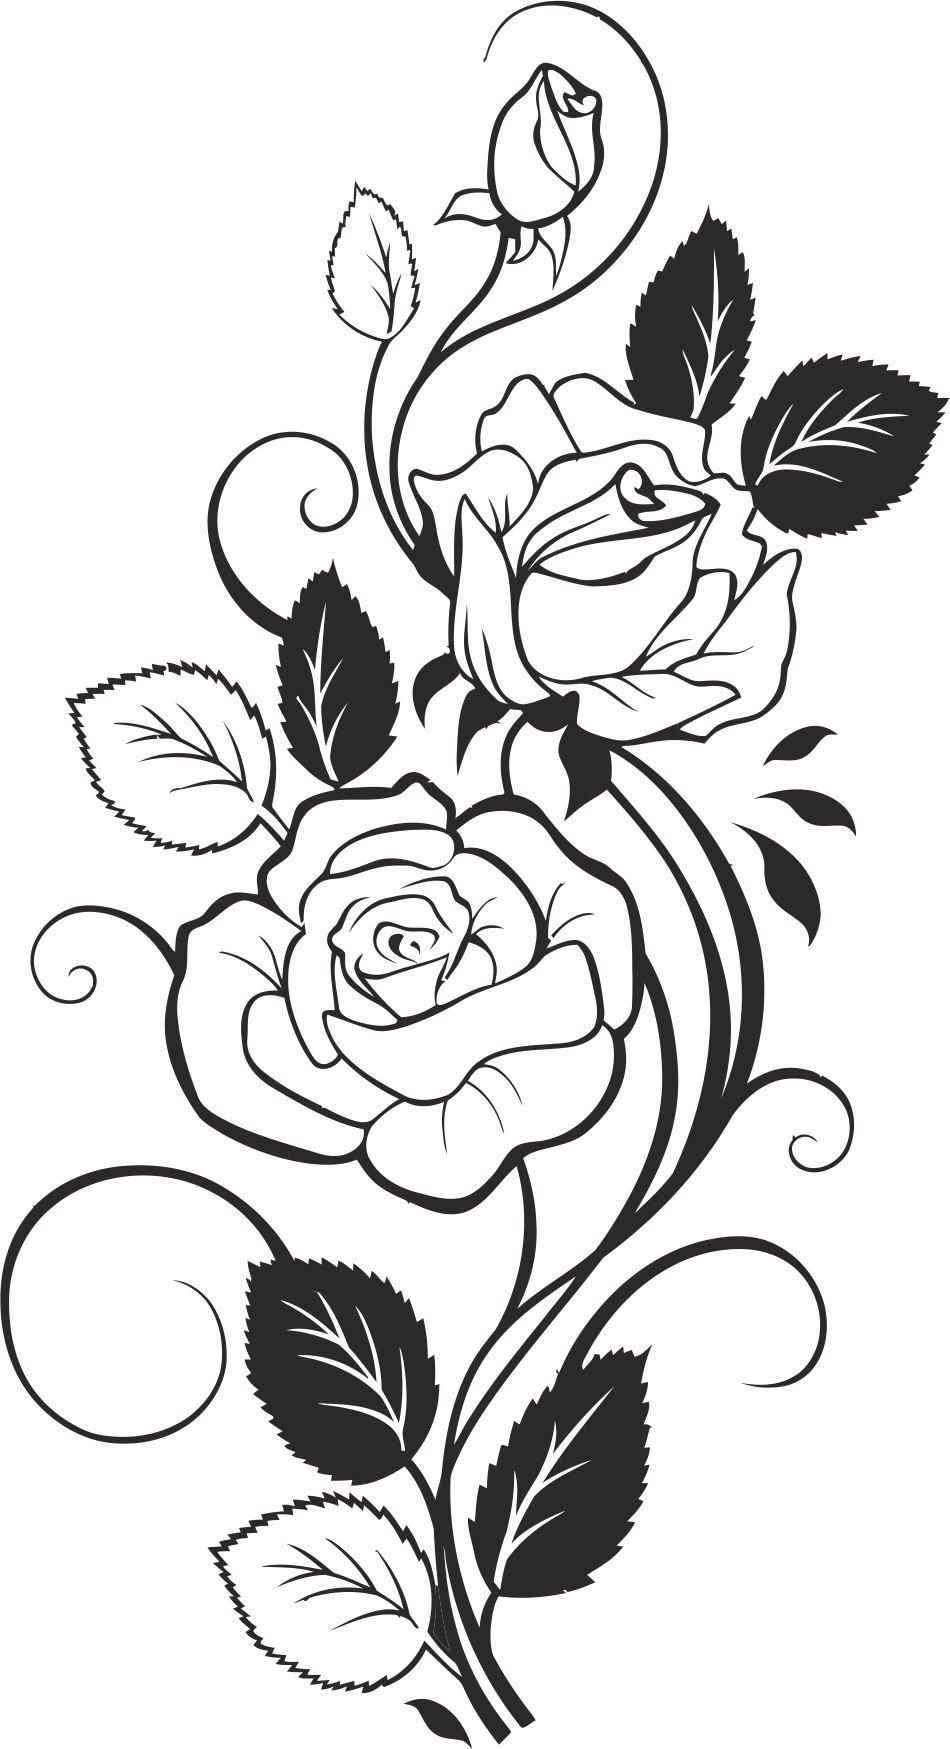 Black and White Rose Vector Free Vector cdr Download